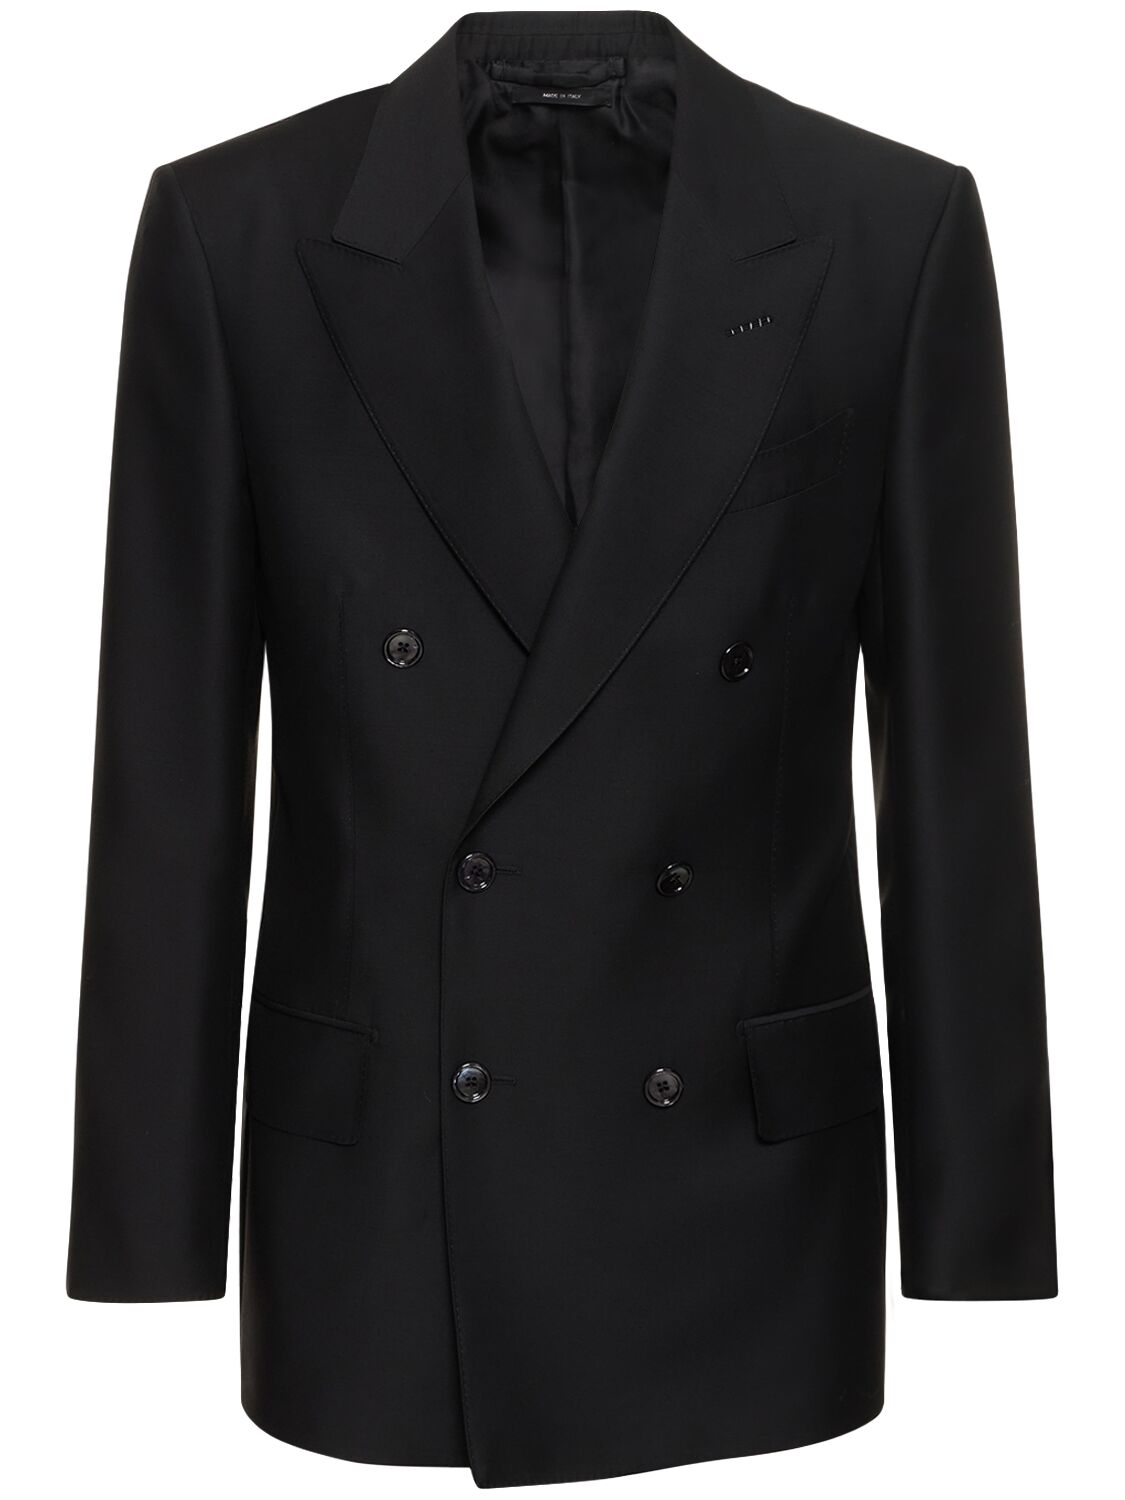 TOM FORD ATTICUS DOUBLE BREAST JACKET